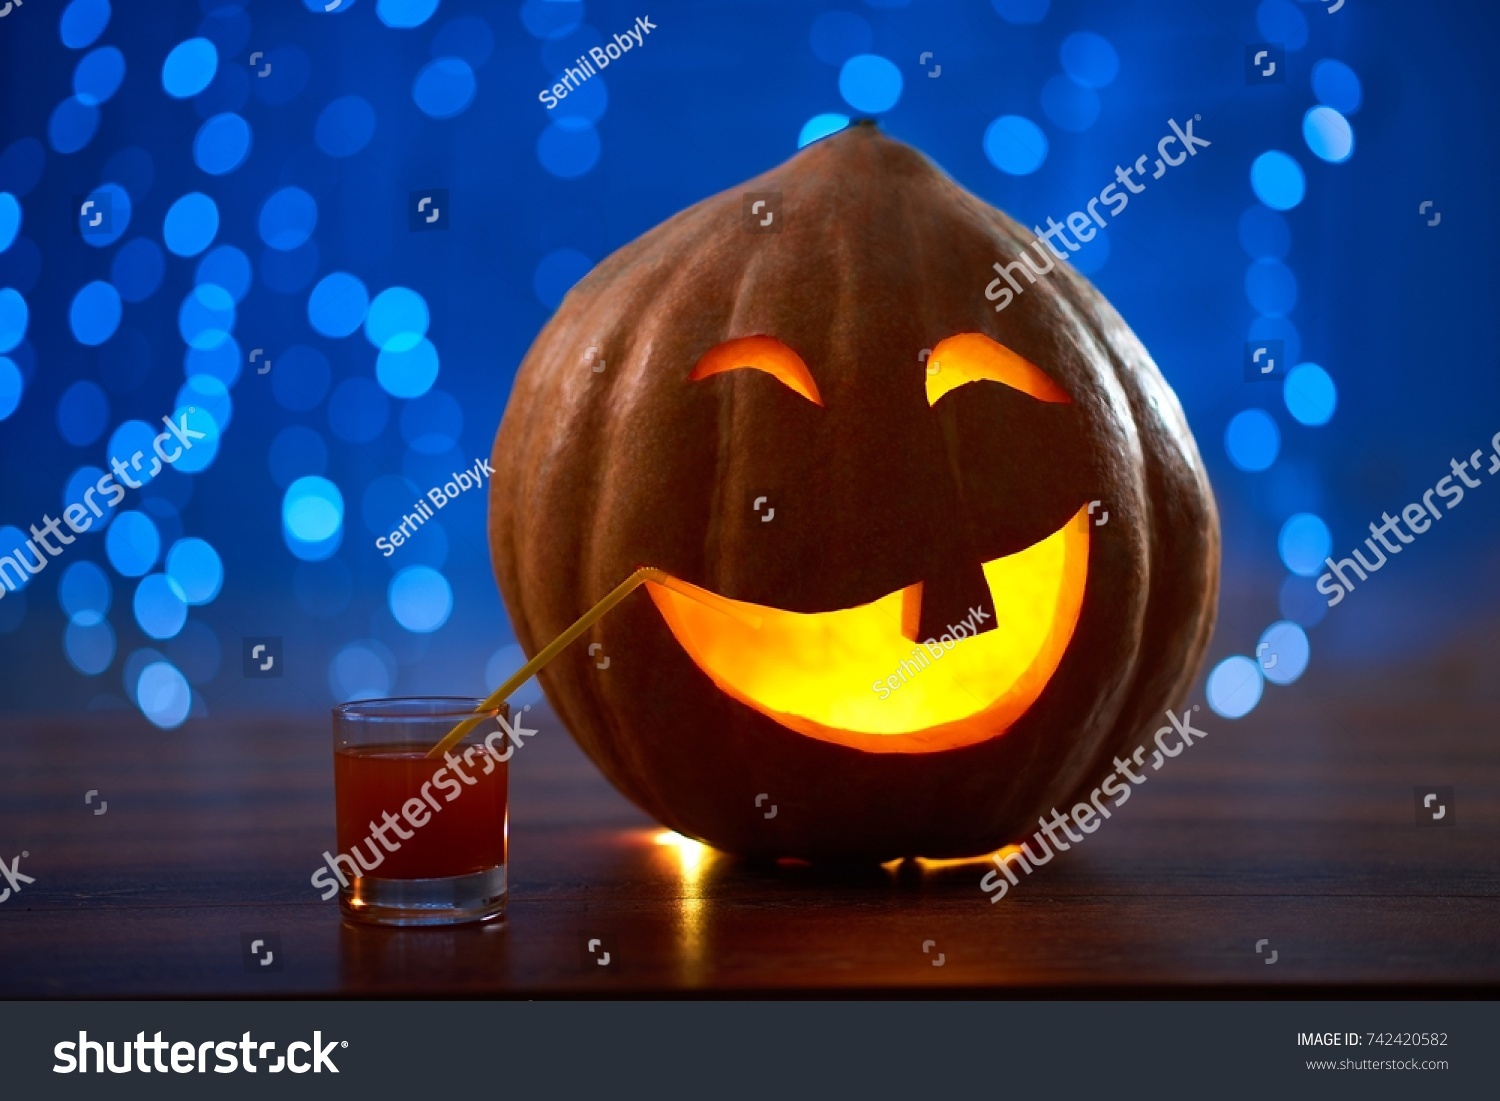 Halloween pumpkin jack face lantern with a candle burning placed on the table with a cocktail copyspace party festive celebrating mood fun autumn concept. #742420582